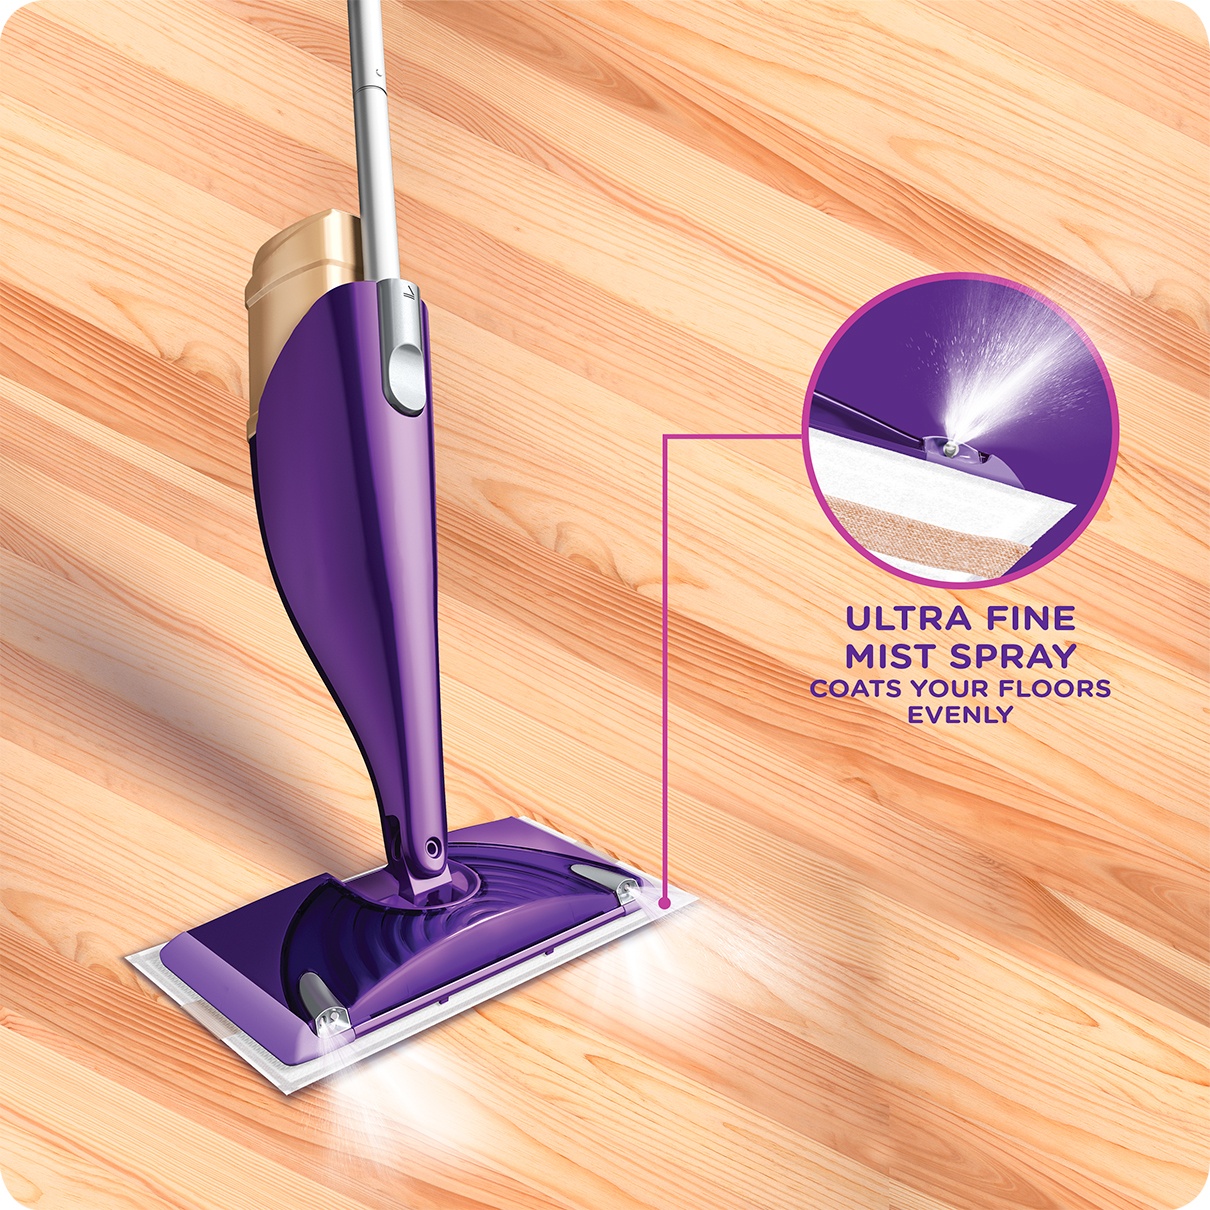 Shop All Swiffer Mopping Products | Swiffer